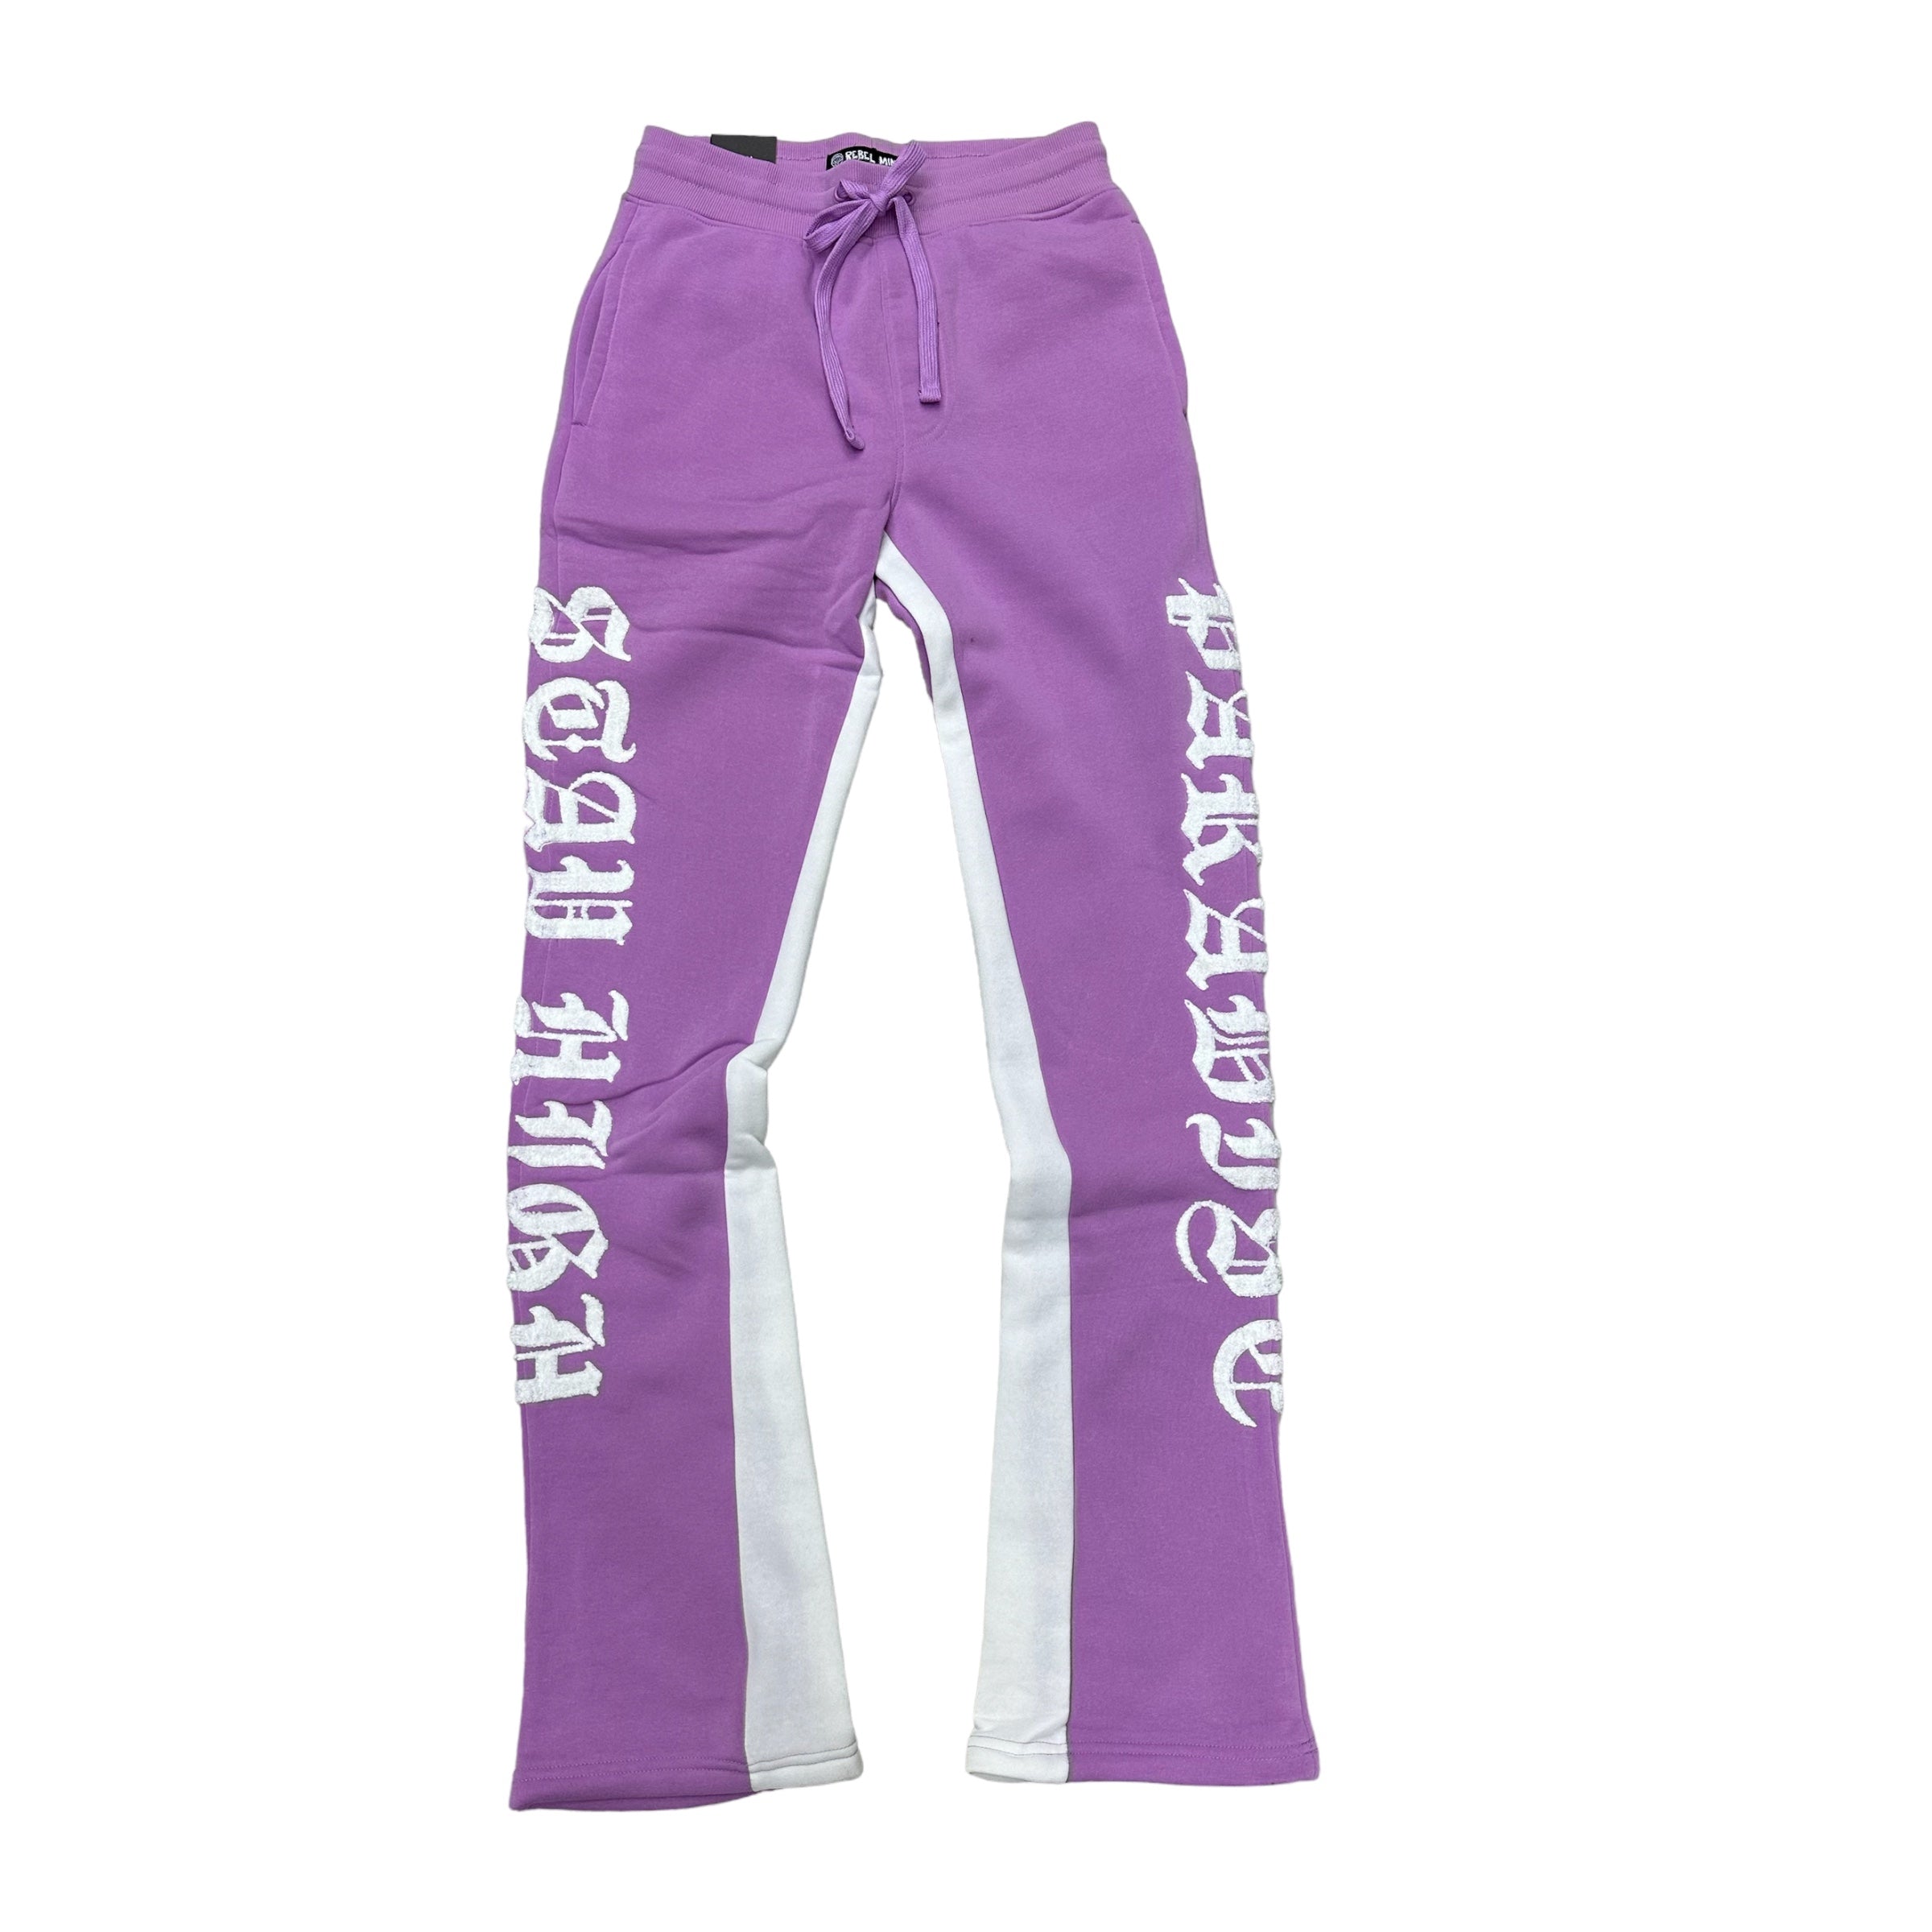 Rebel stay high Stacked Sweat Pants Lavender 498